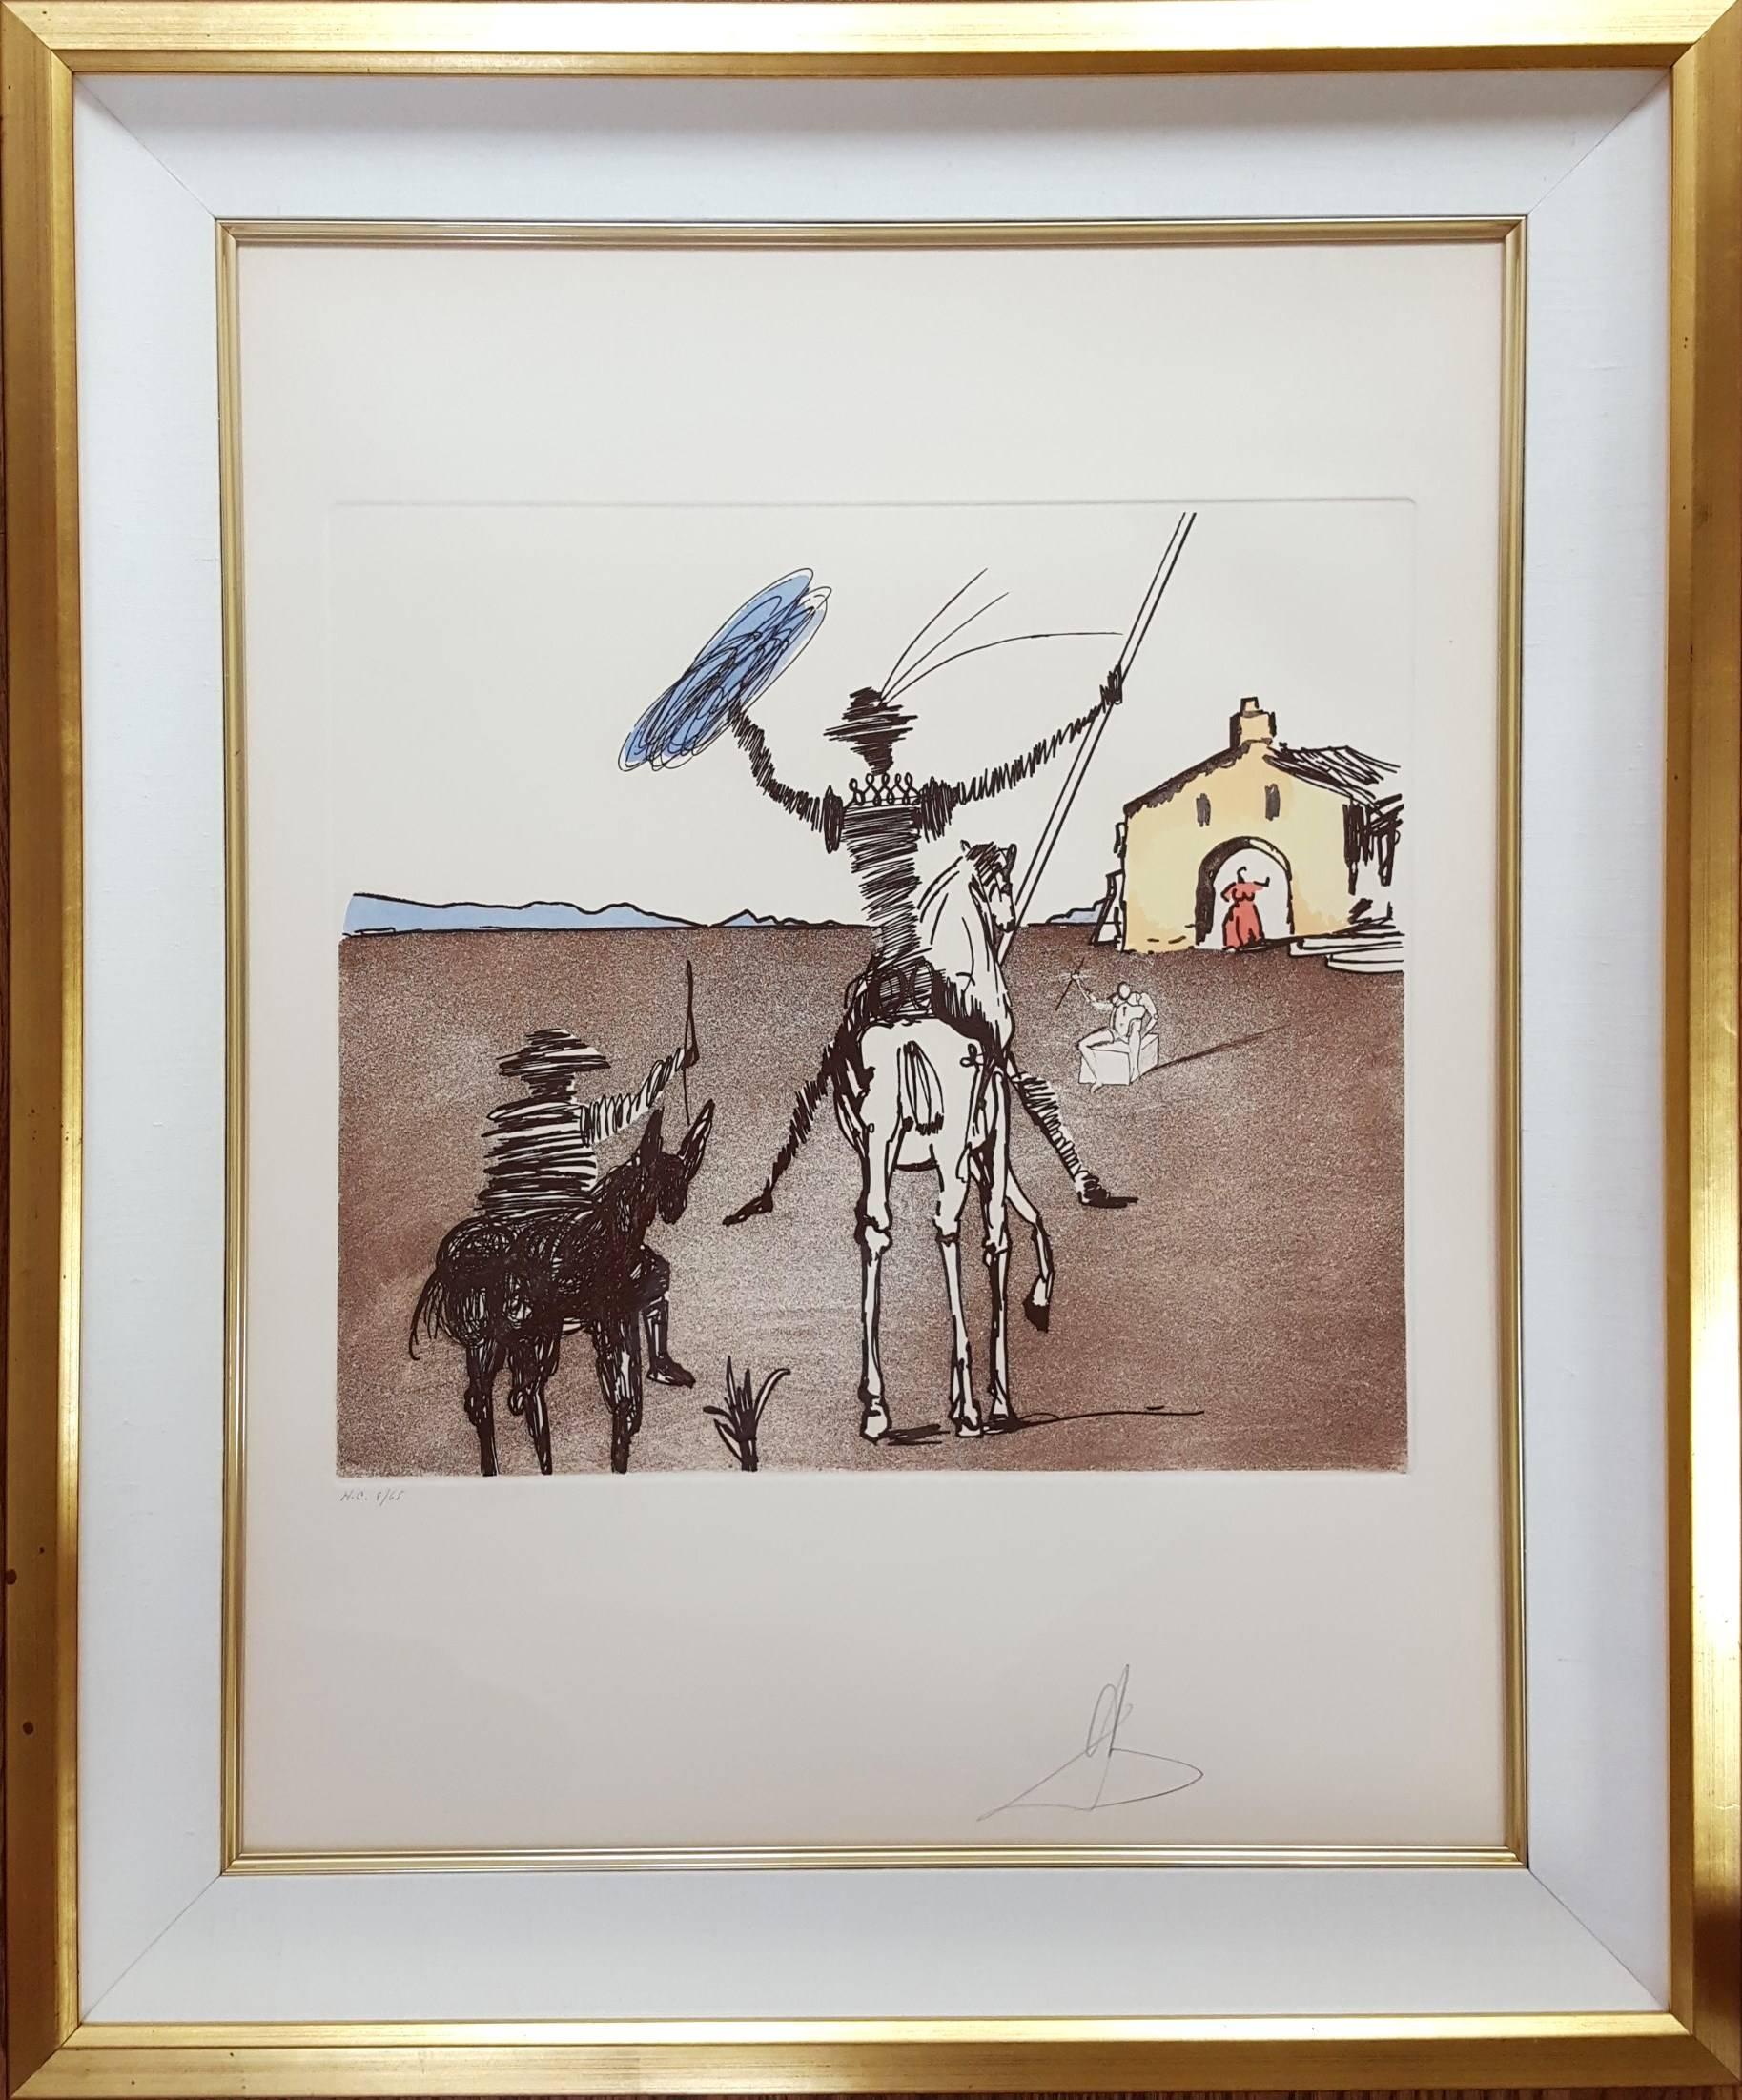 The Impossible Dream (A.F.144.O) - Print by Salvador Dalí